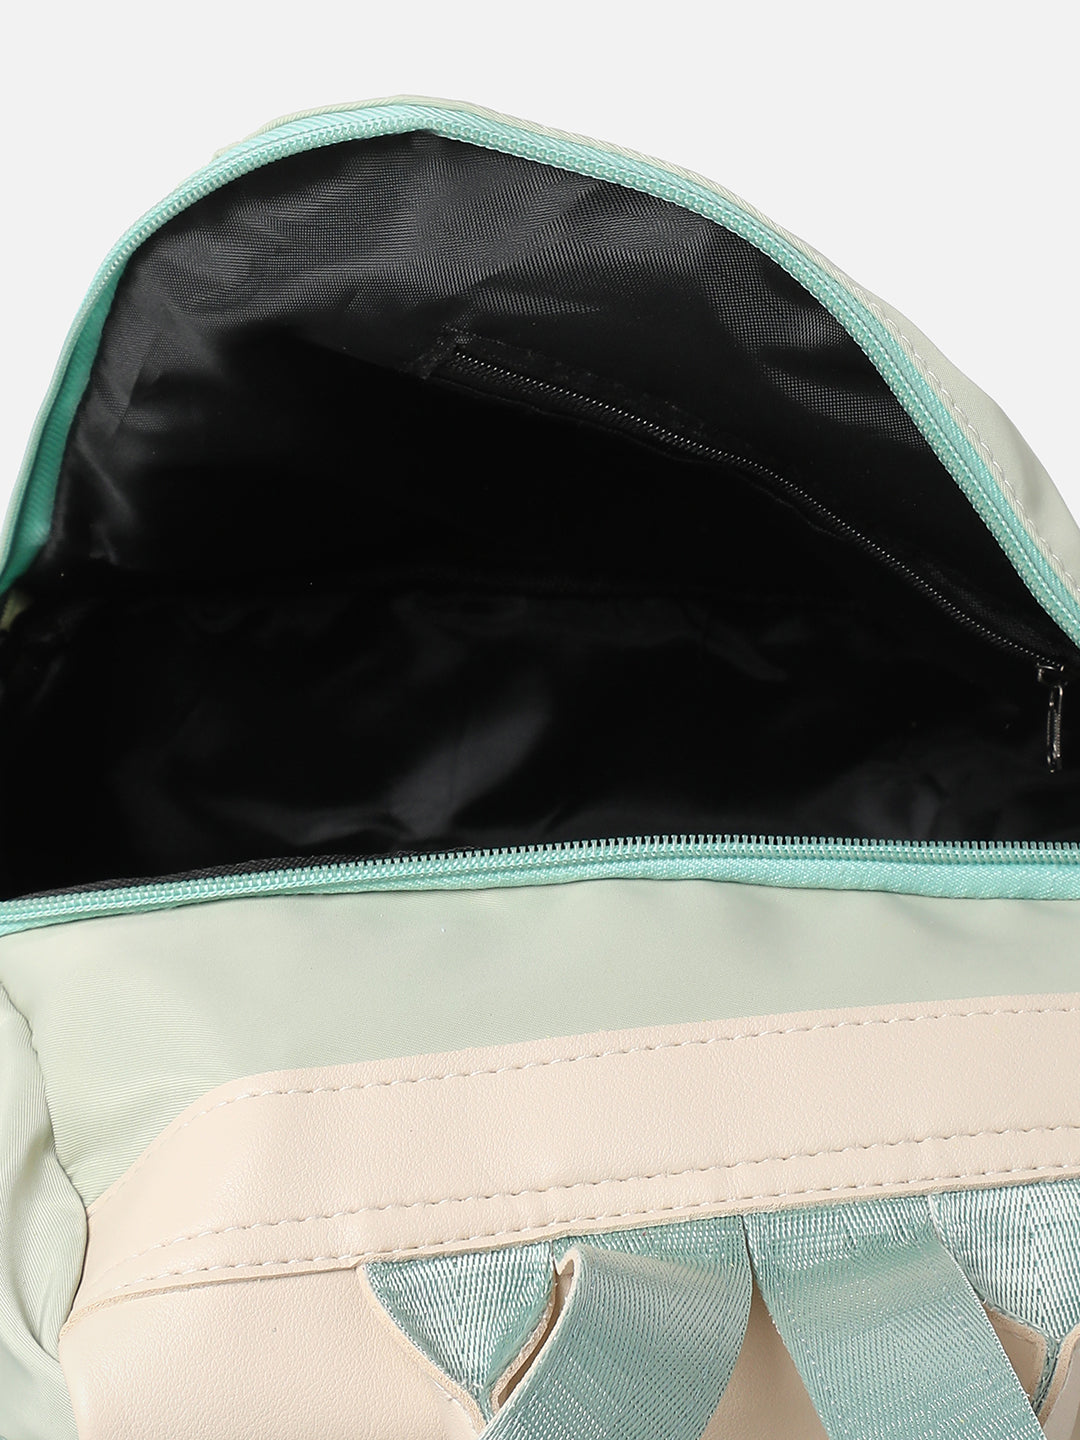 COLOURBLOCKED BACKPACK WITH TOP HANDLE